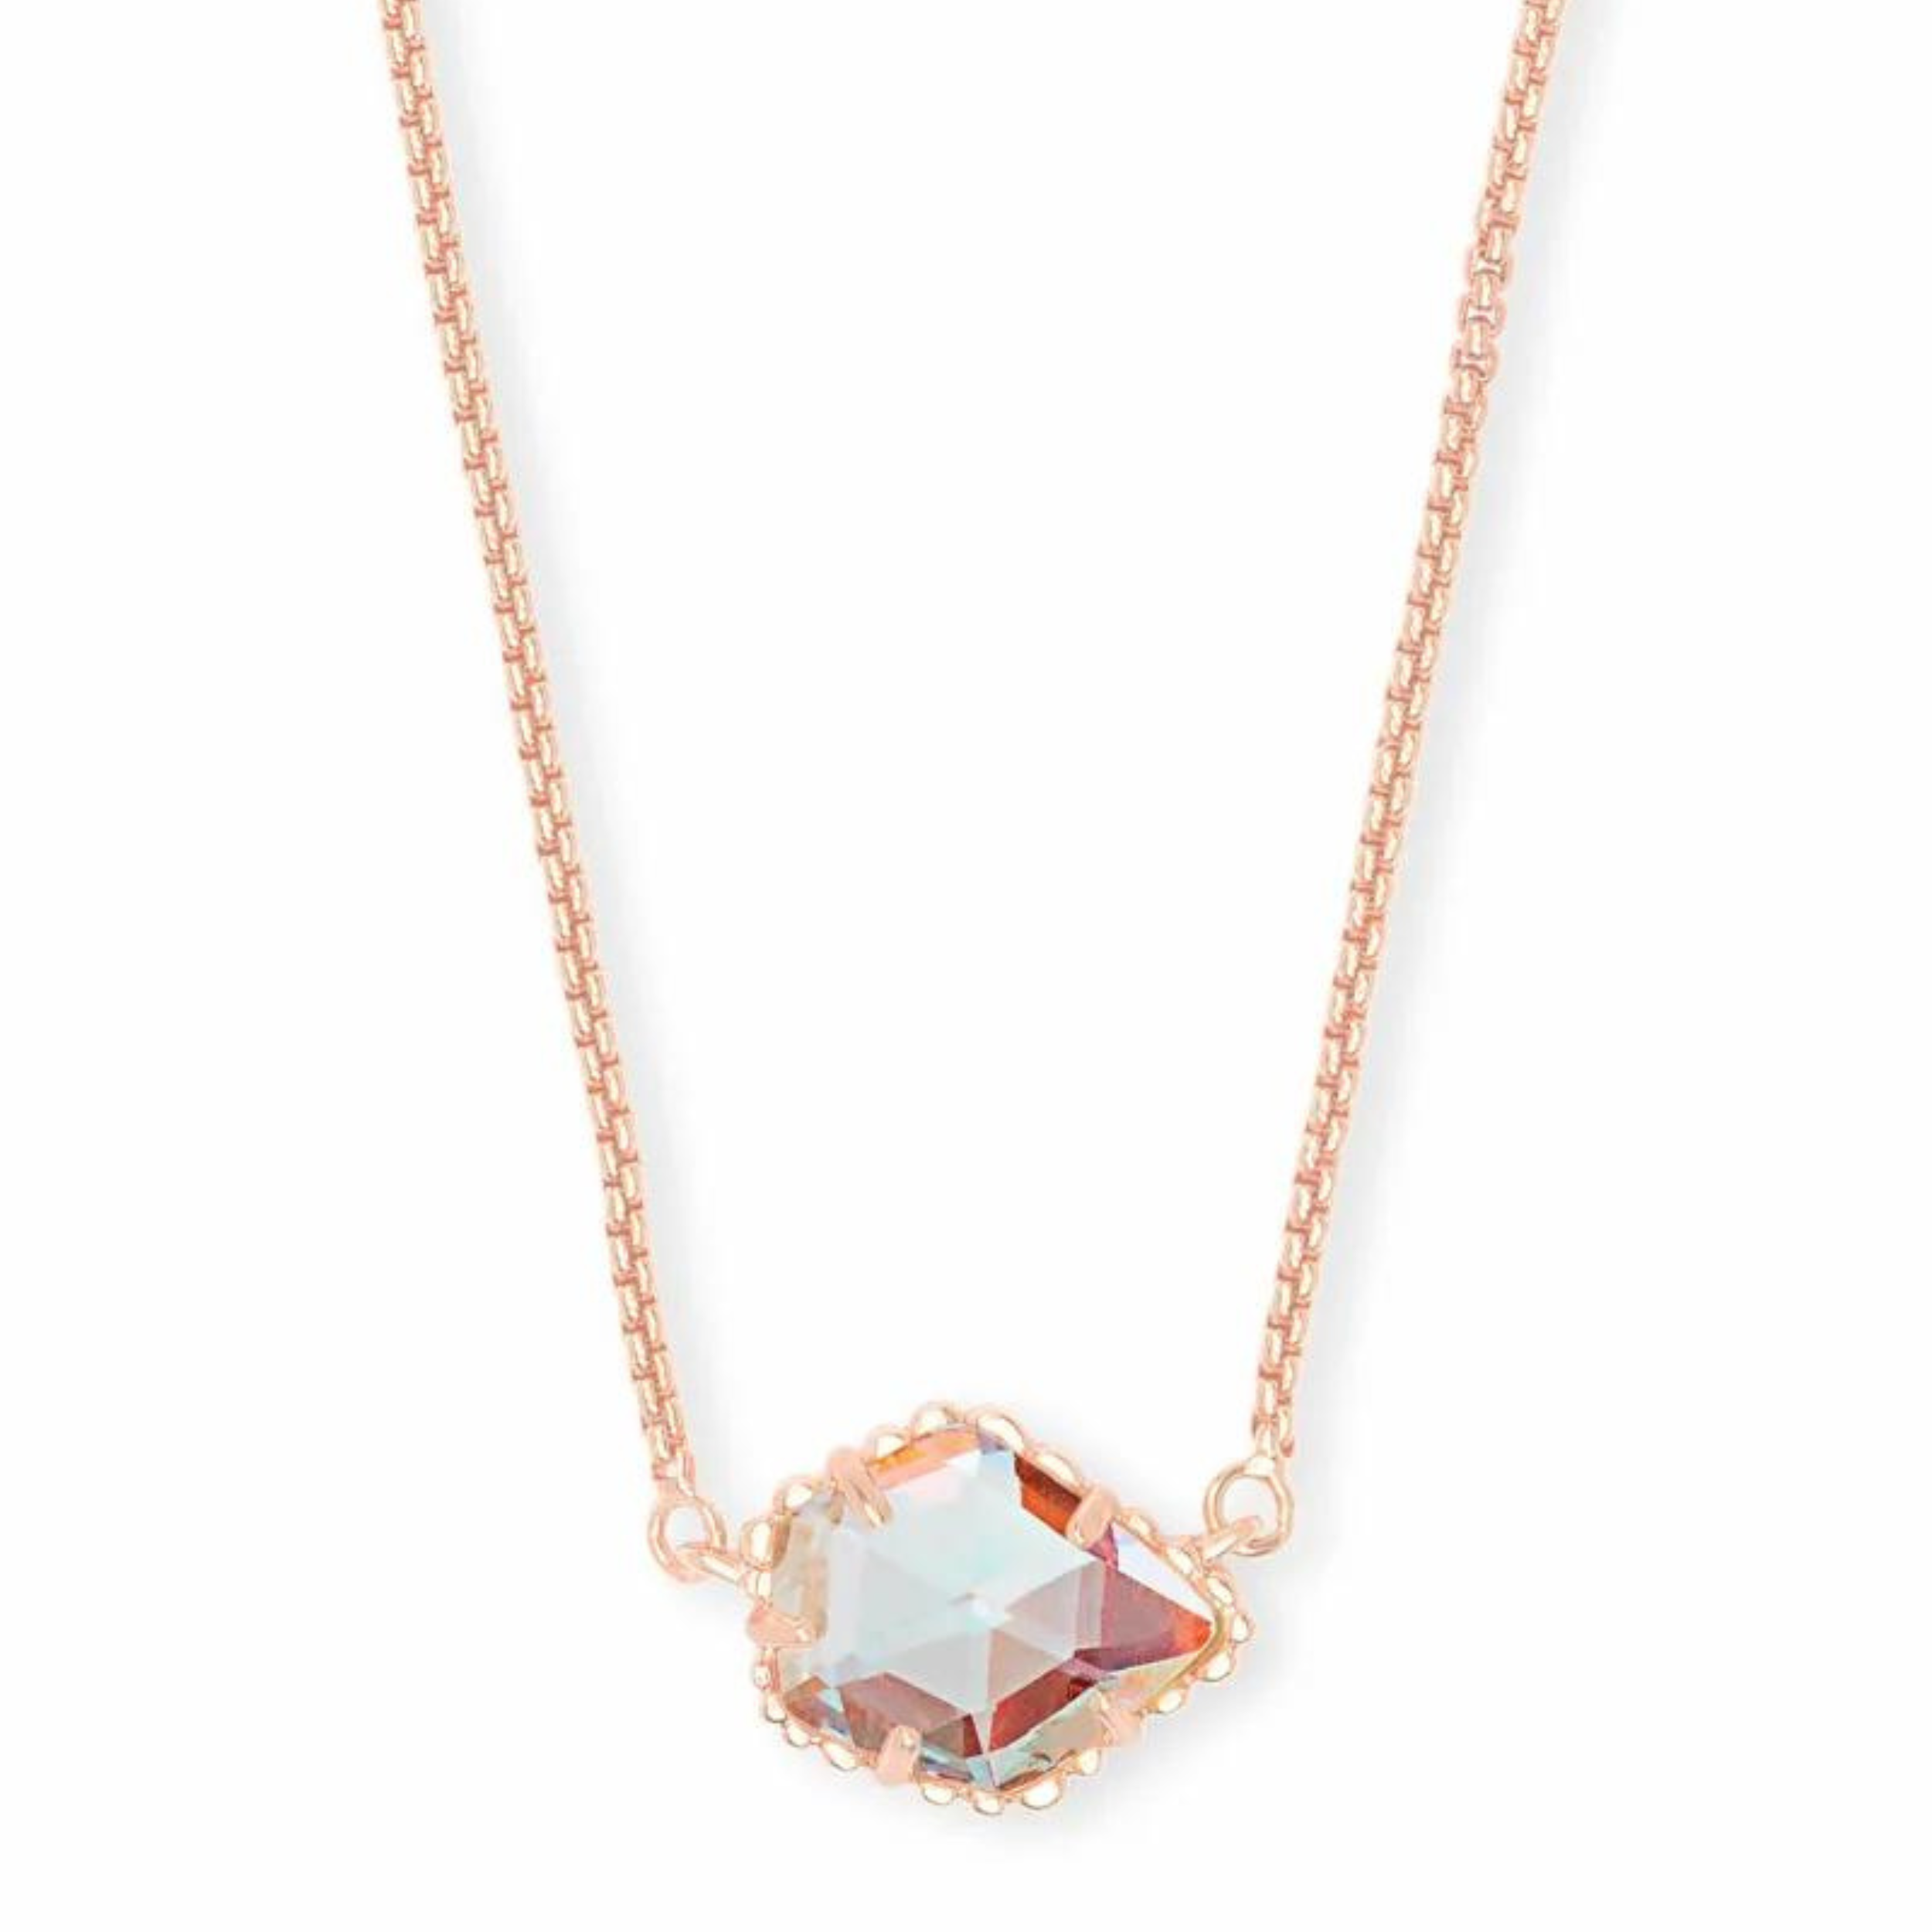 Rose gold necklace with dichroic glass pendant, pictured on a white background.